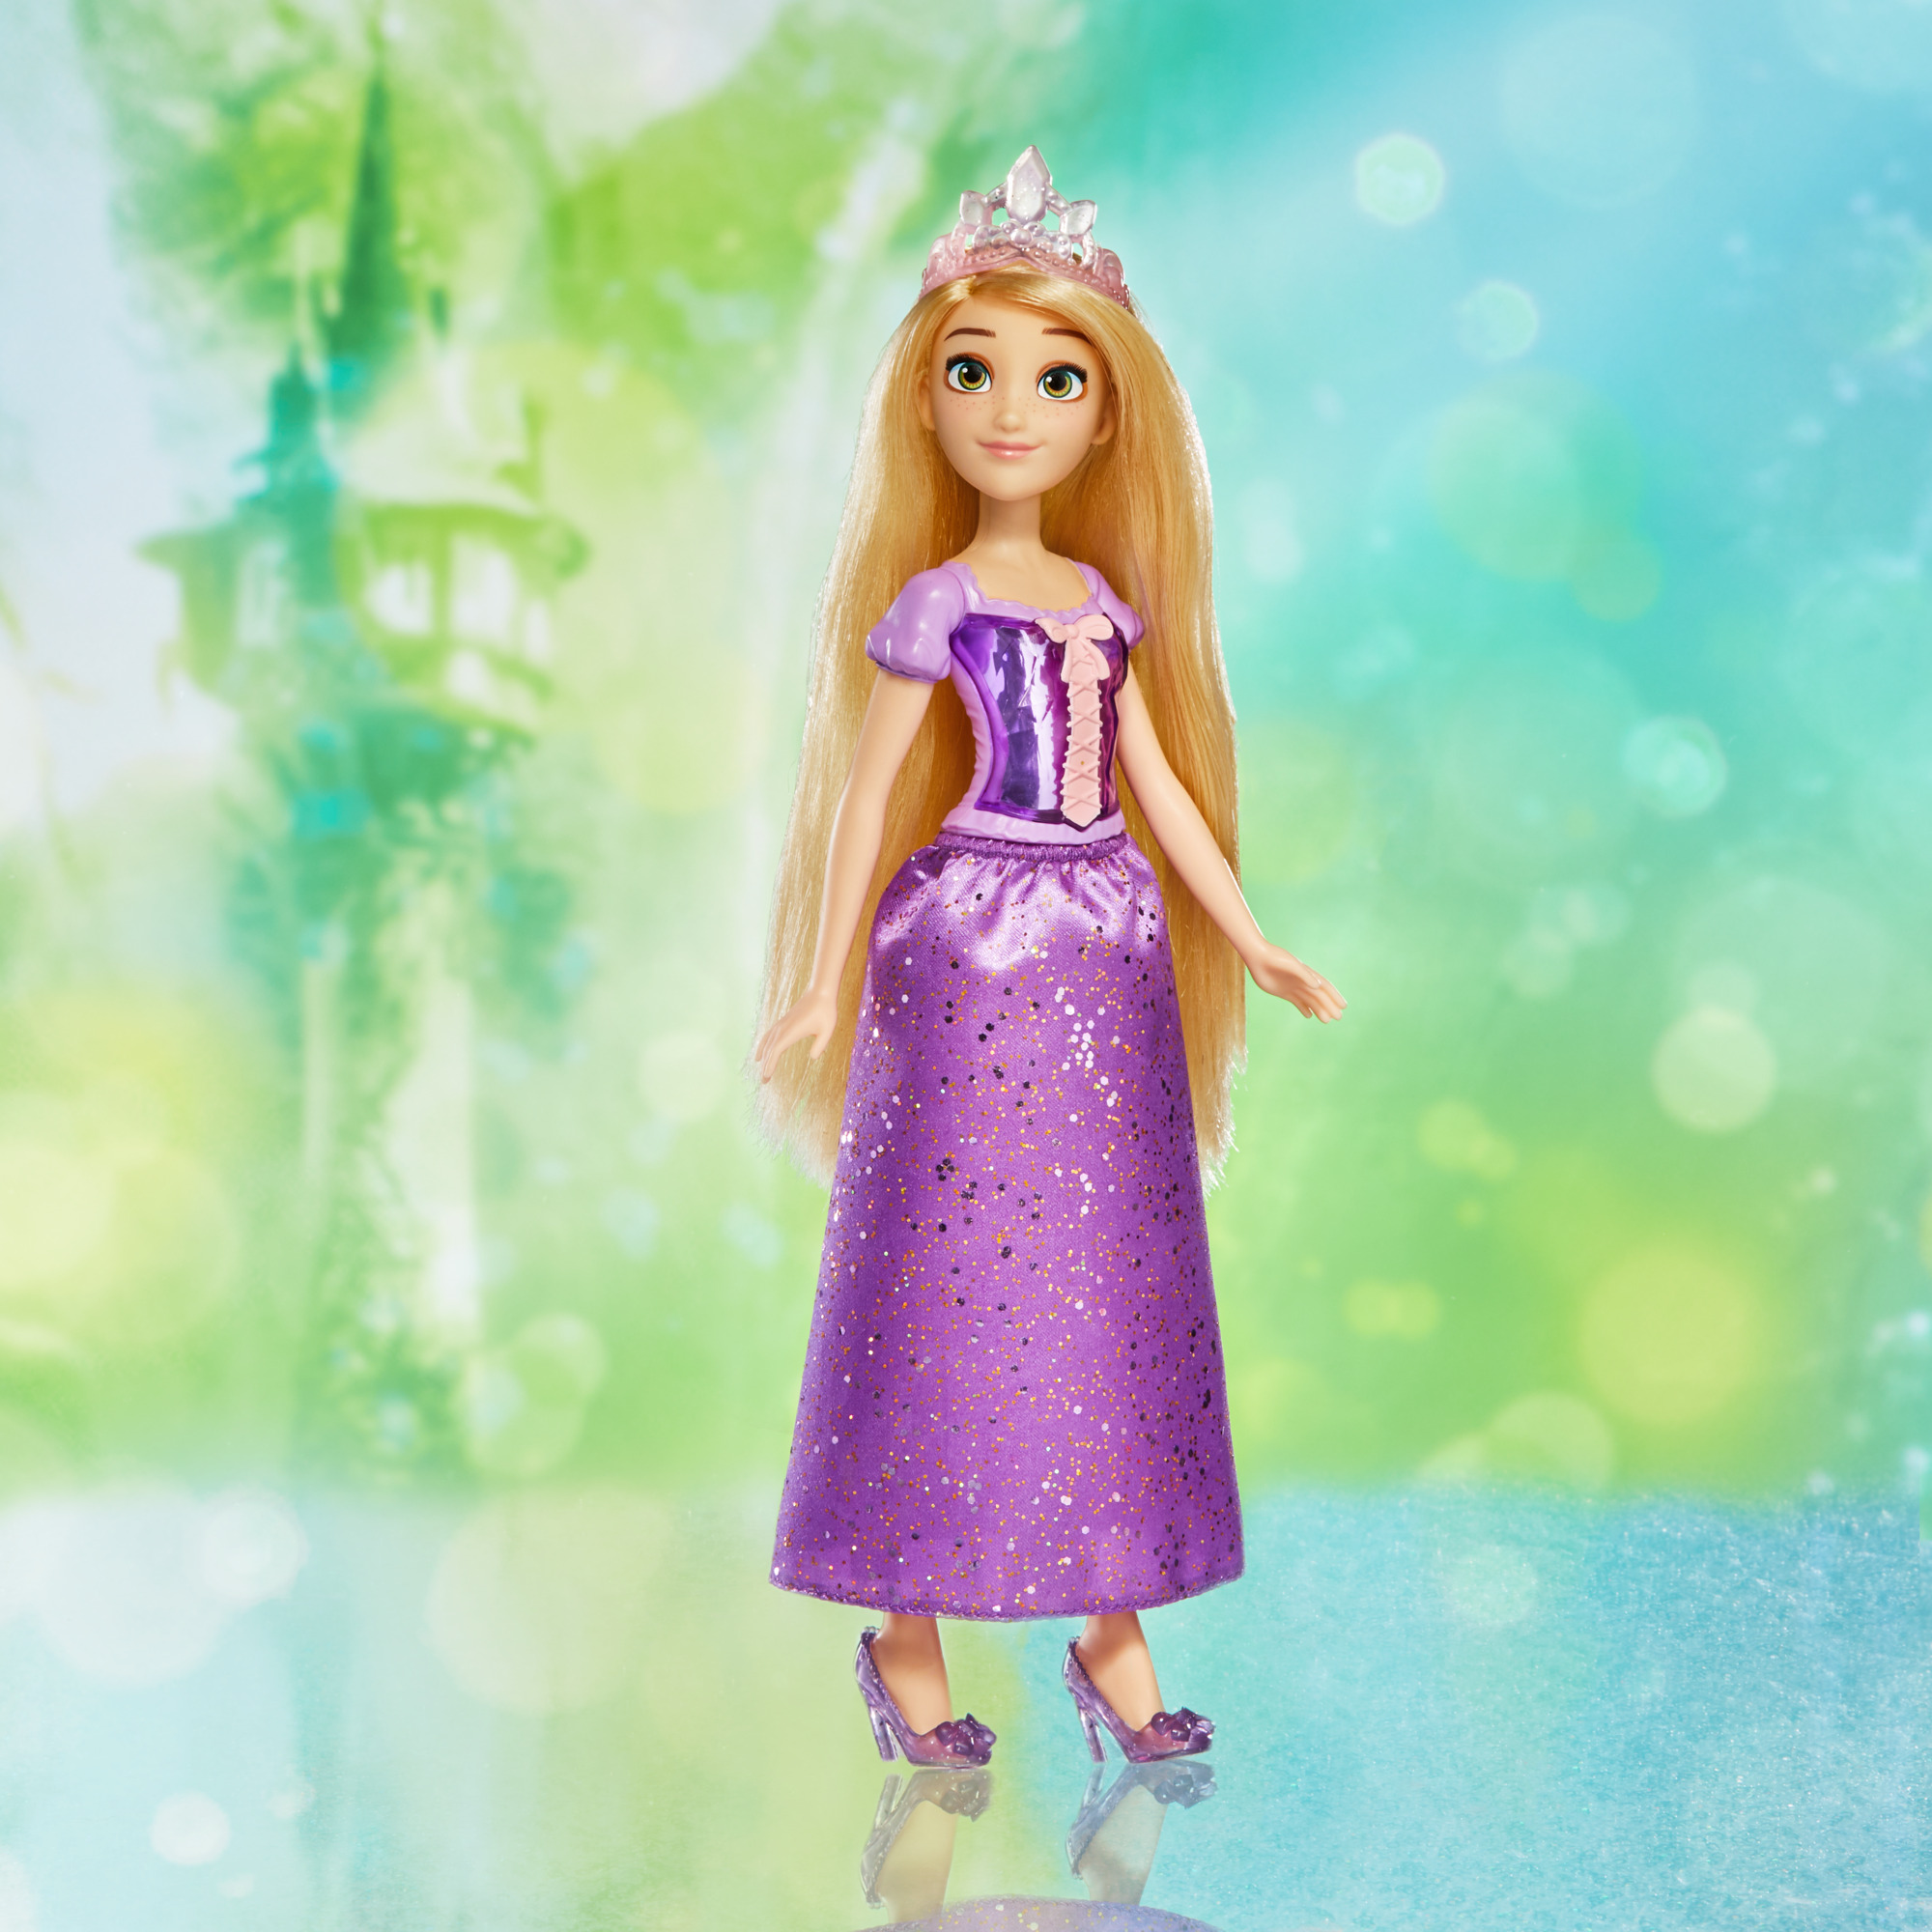 Disney Princess Royal Shimmer Rapunzel Doll, with Skirt and Accessories - image 5 of 8